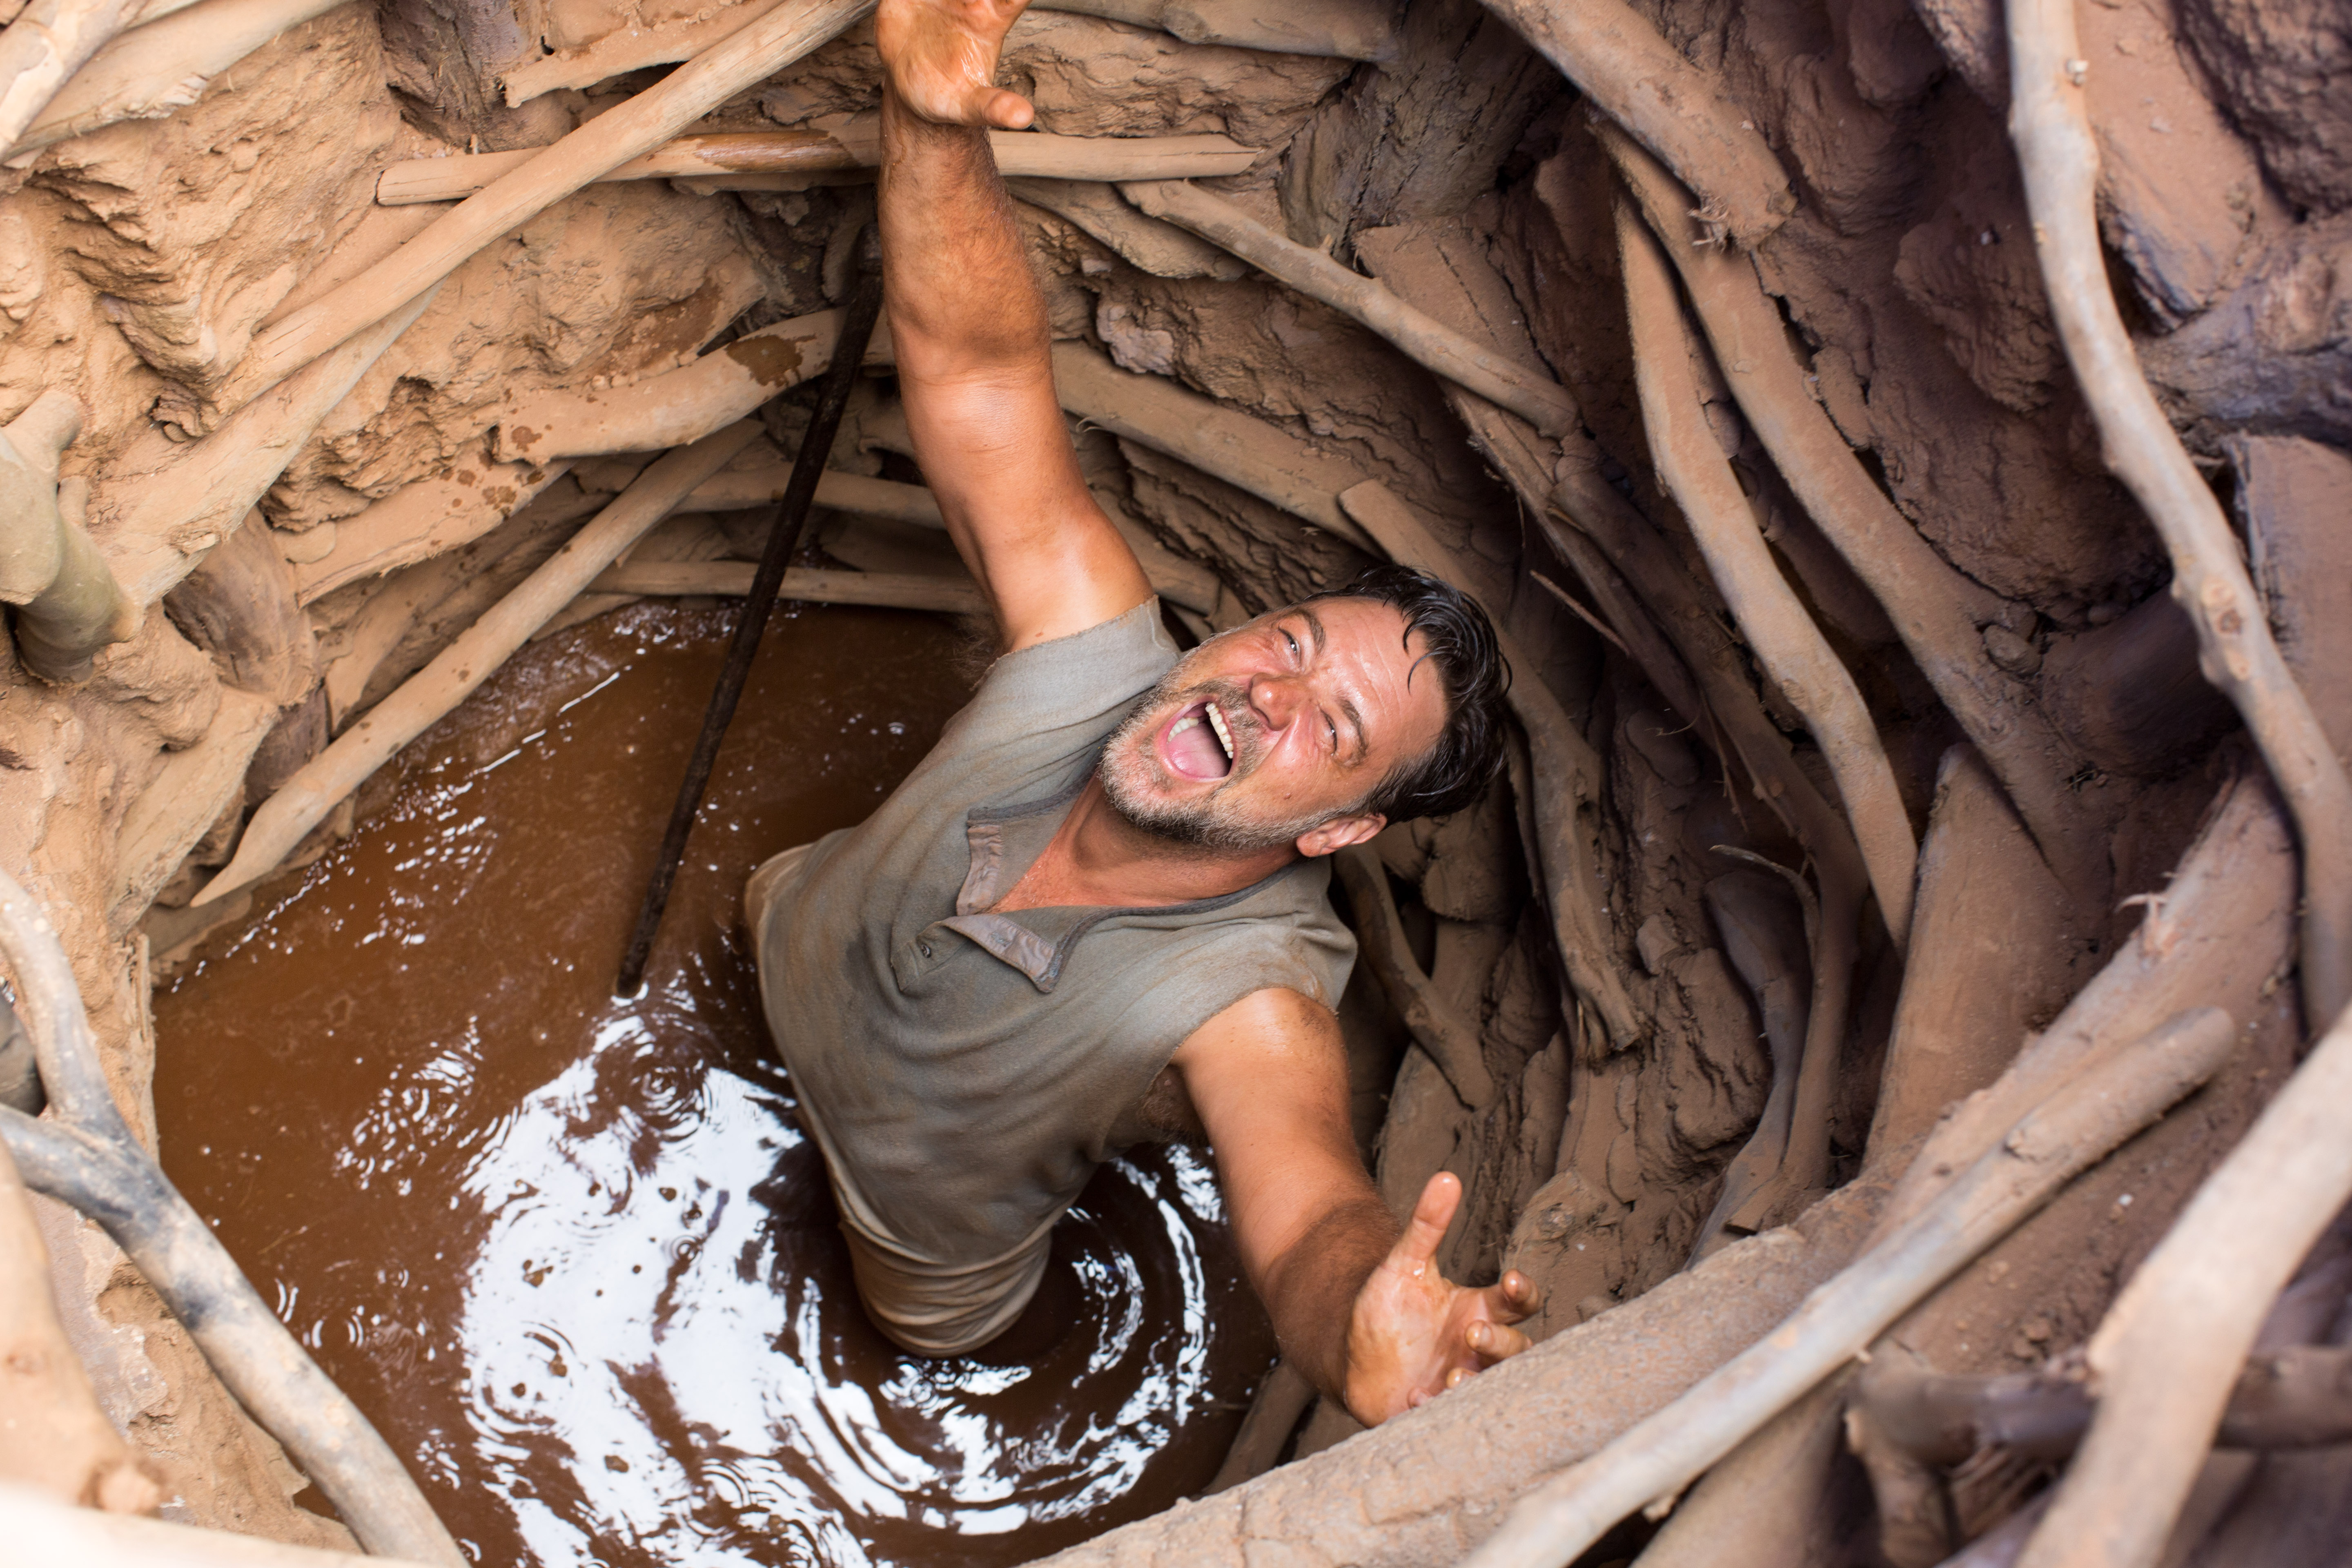 Russell Crowe directs and stars in "The Water Diviner," which will be shown today at 6:30 p.m. at AMC Mazza Gallerie. (Photo: Warner Bros. Pictures)